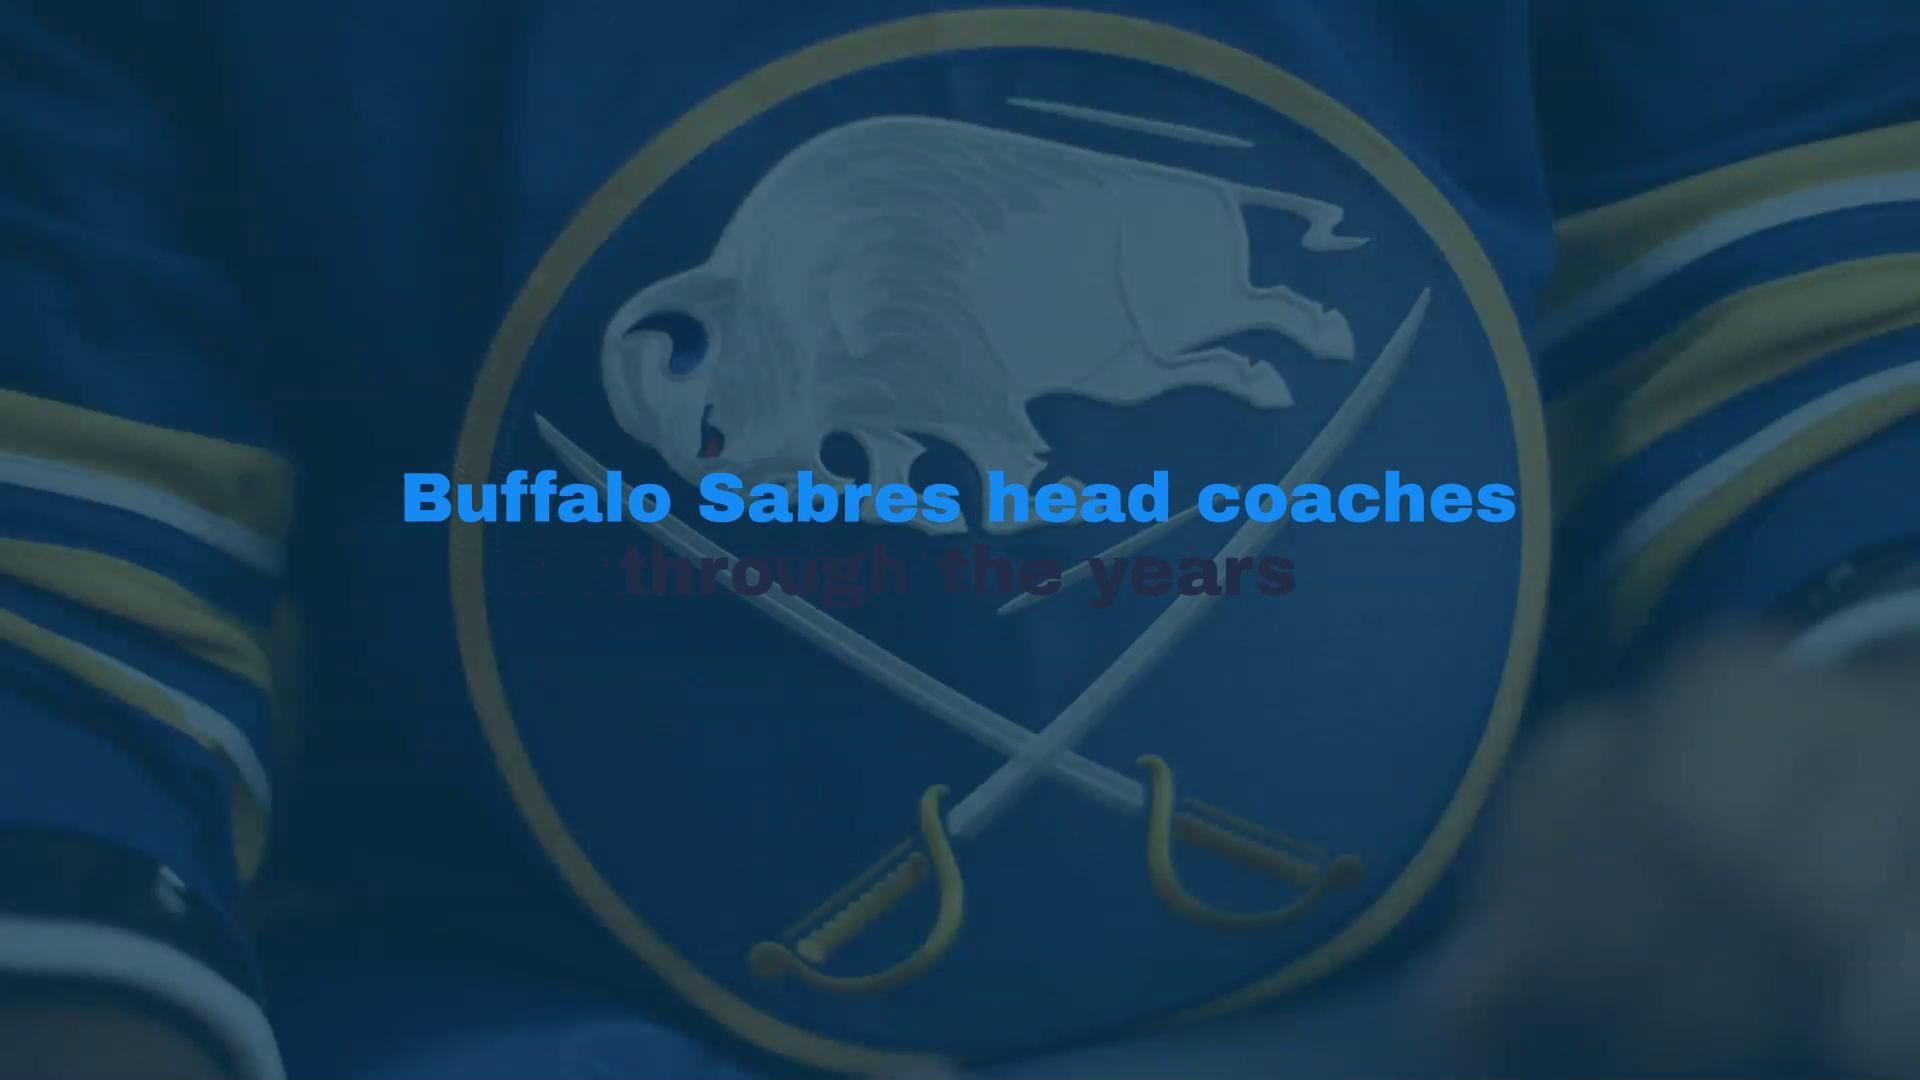 Built in Buffalo on X: Per sources, the Sabres 2022-23 reverse